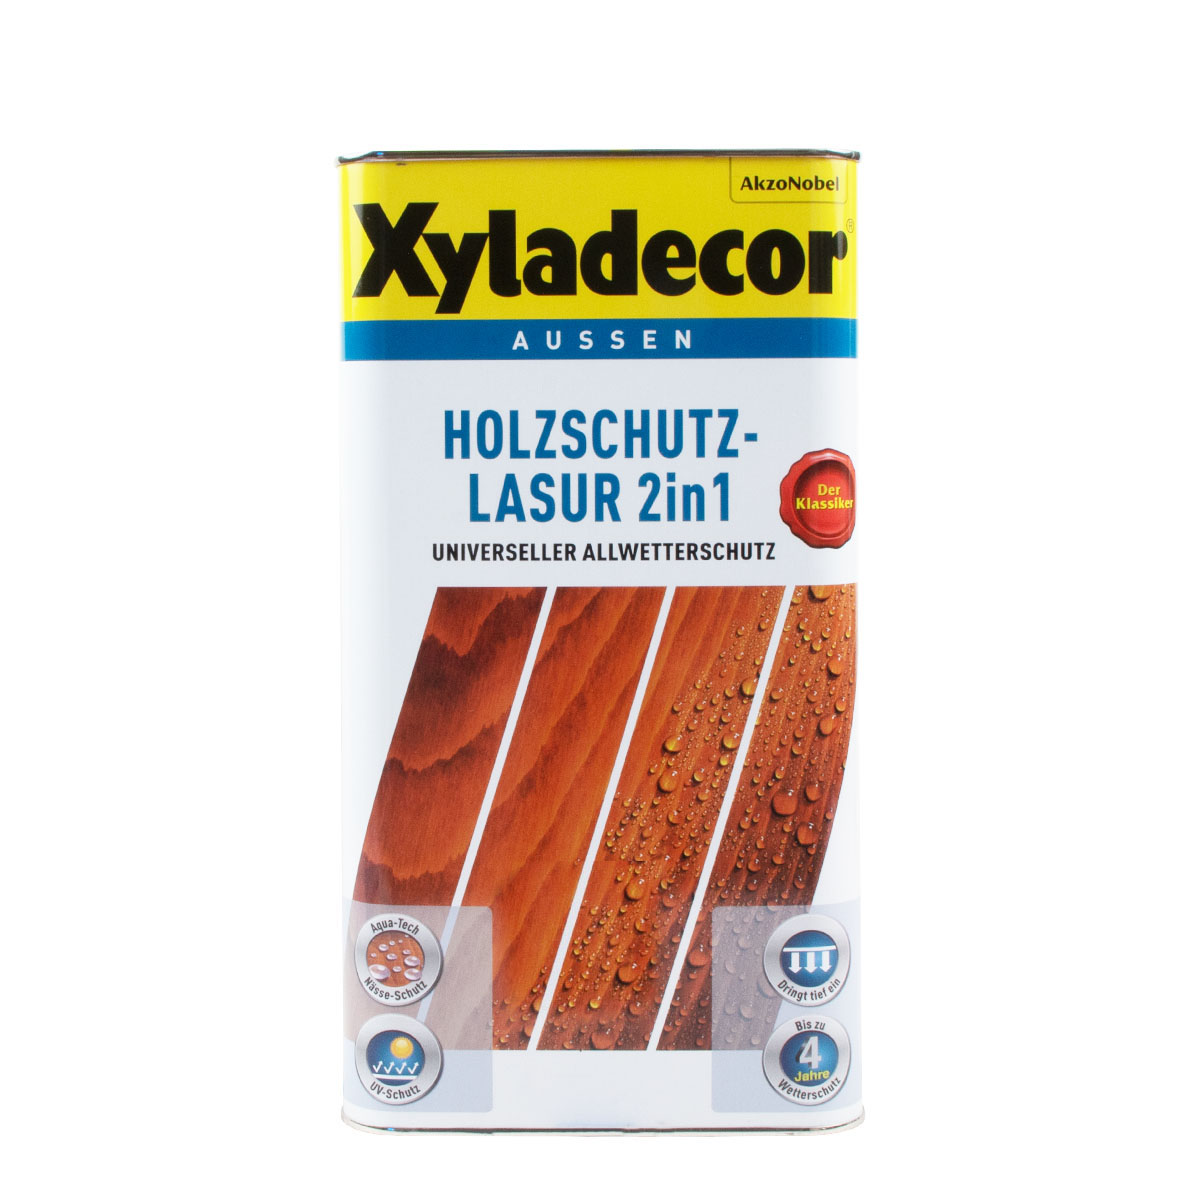 Xyladecor Holzschutz-Lasur 2in1 5L Eiche-hell